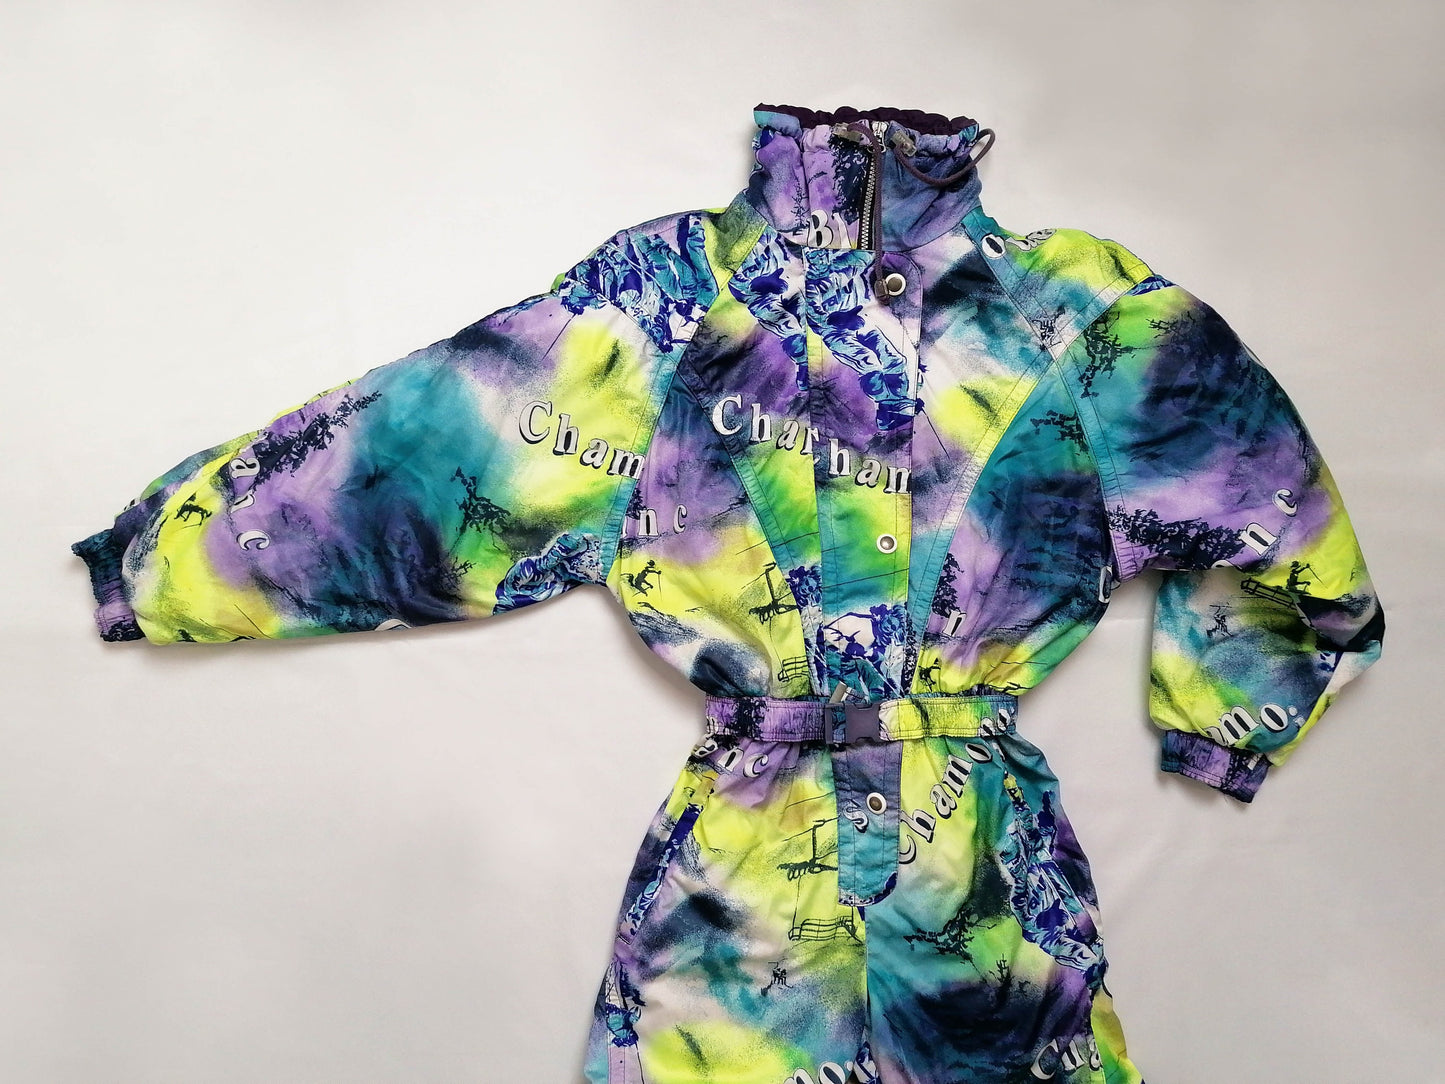 80's 90's Made in Finland Tie-Dye Ski Suit - size S-M